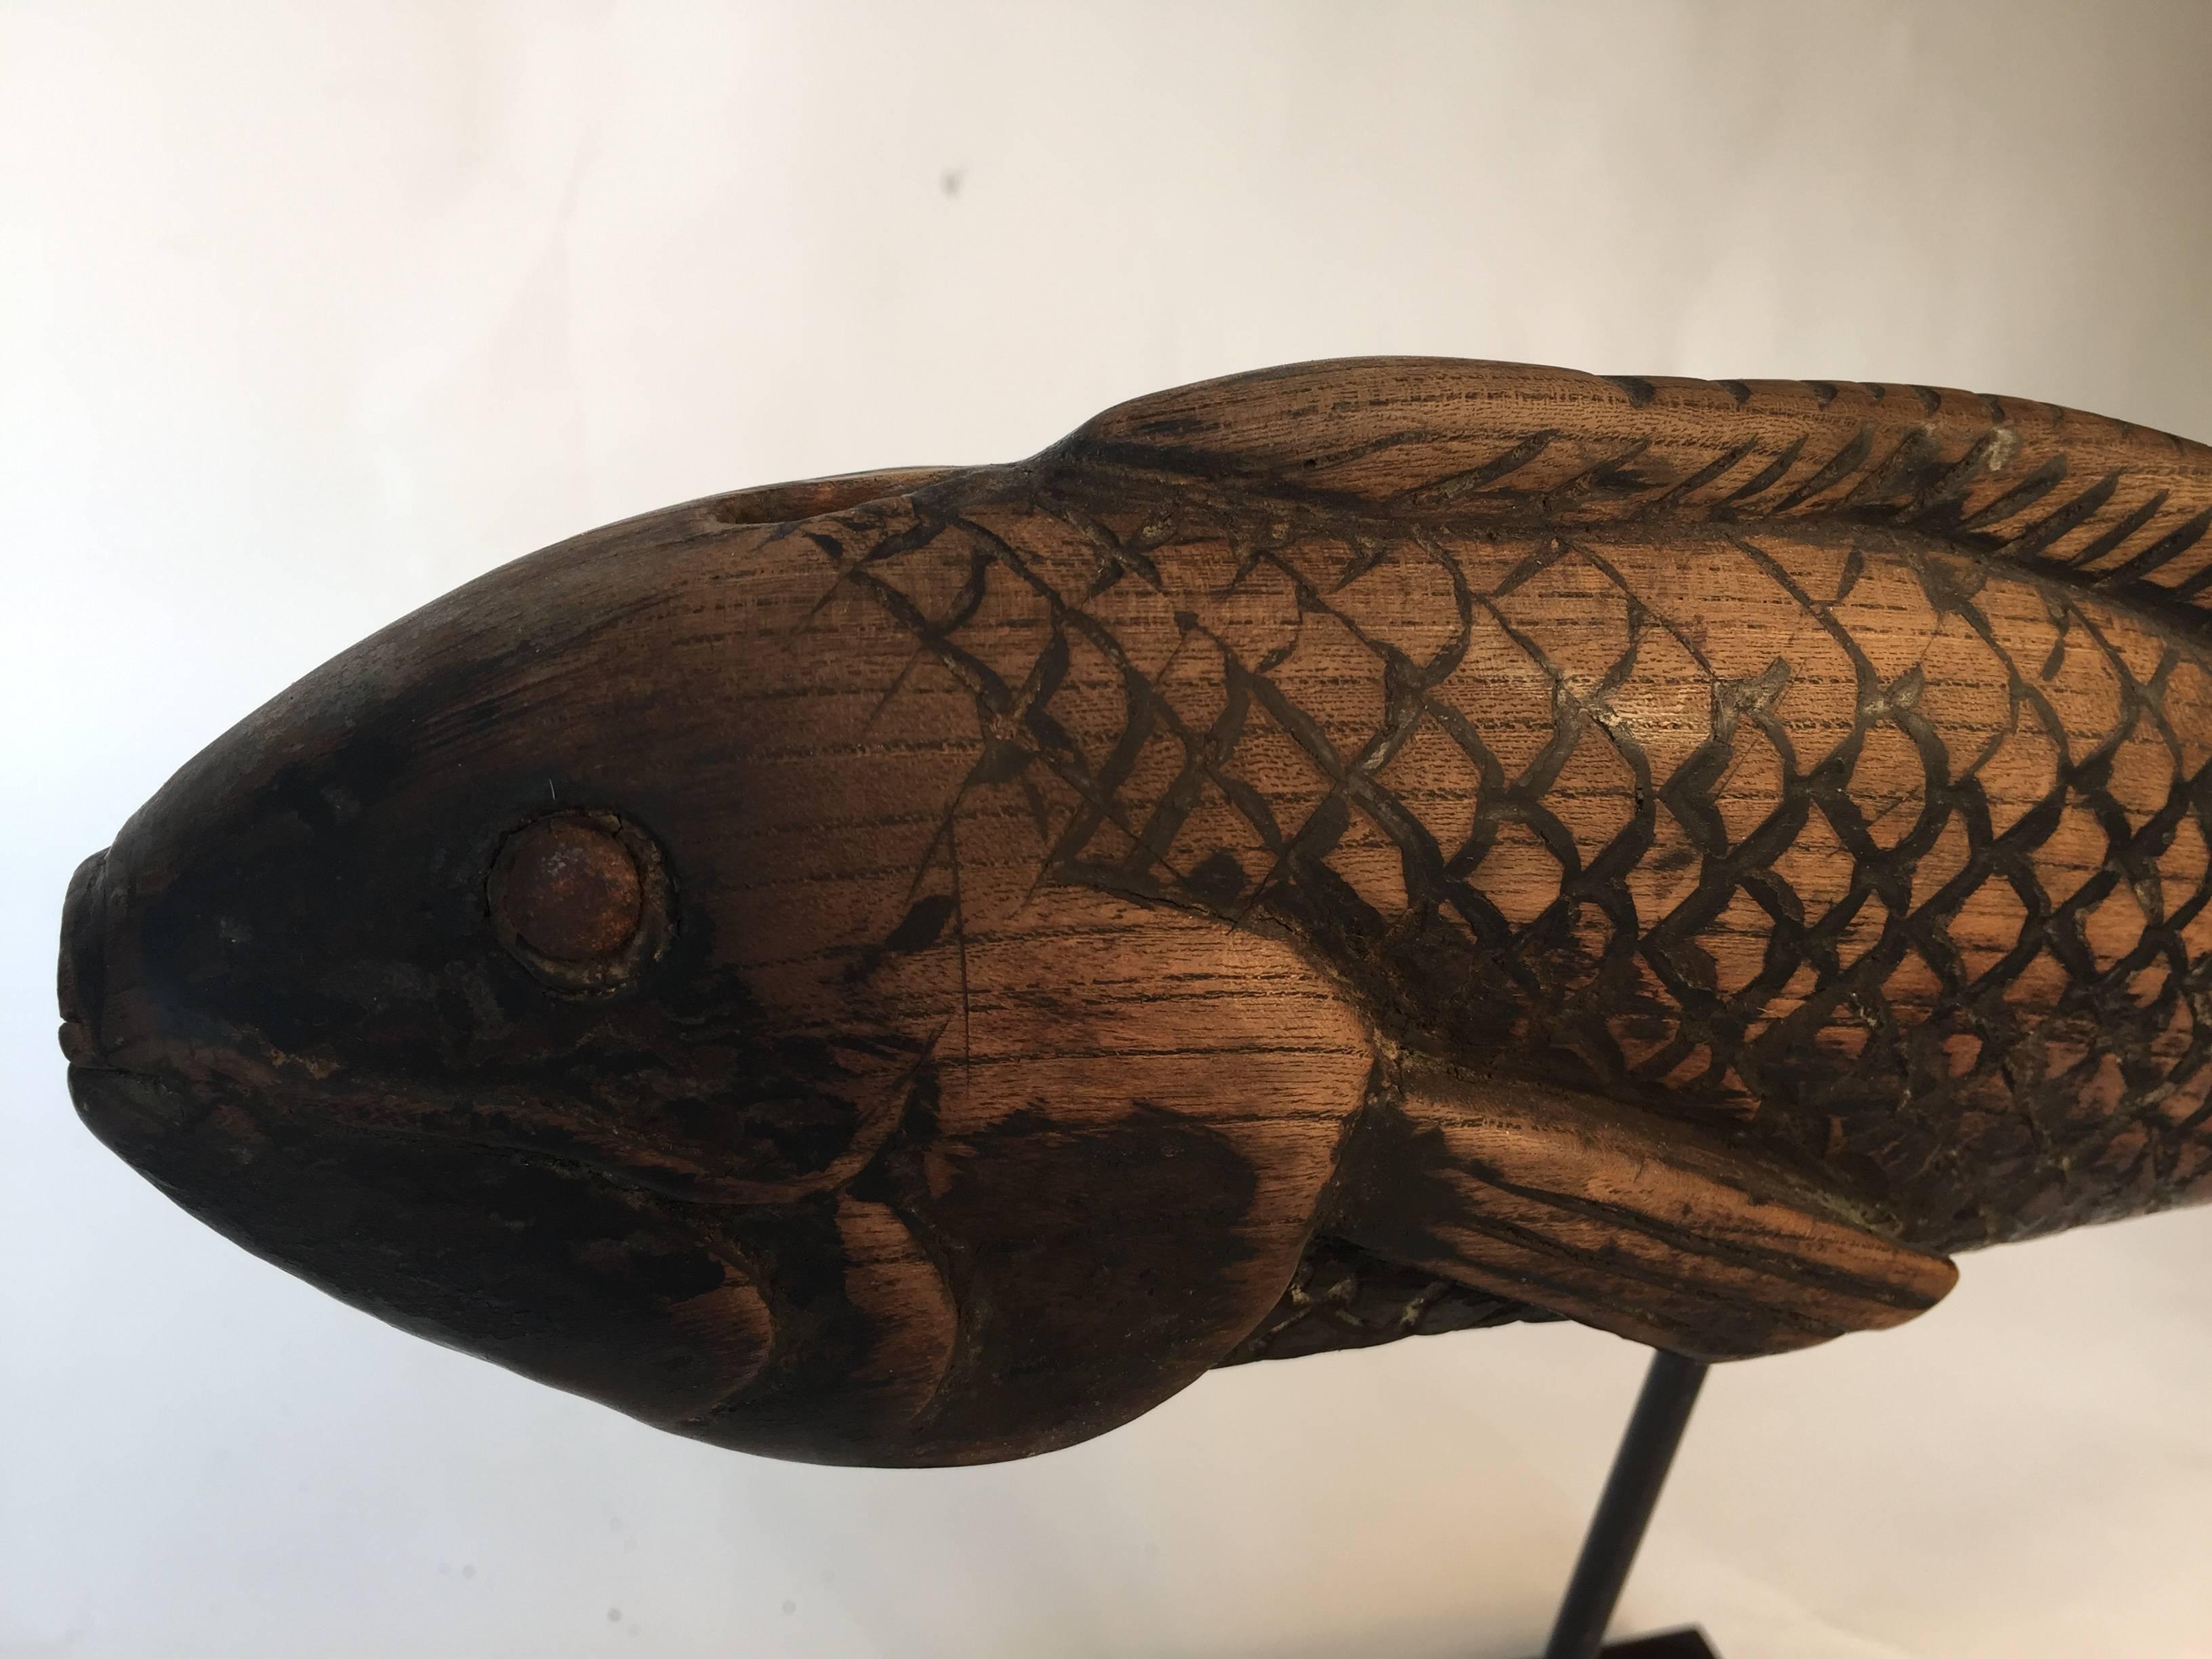 Japanese Hand-Carved Wood KOI Good Fortune Fish Sculpture, 19thc FREE SHIP 1